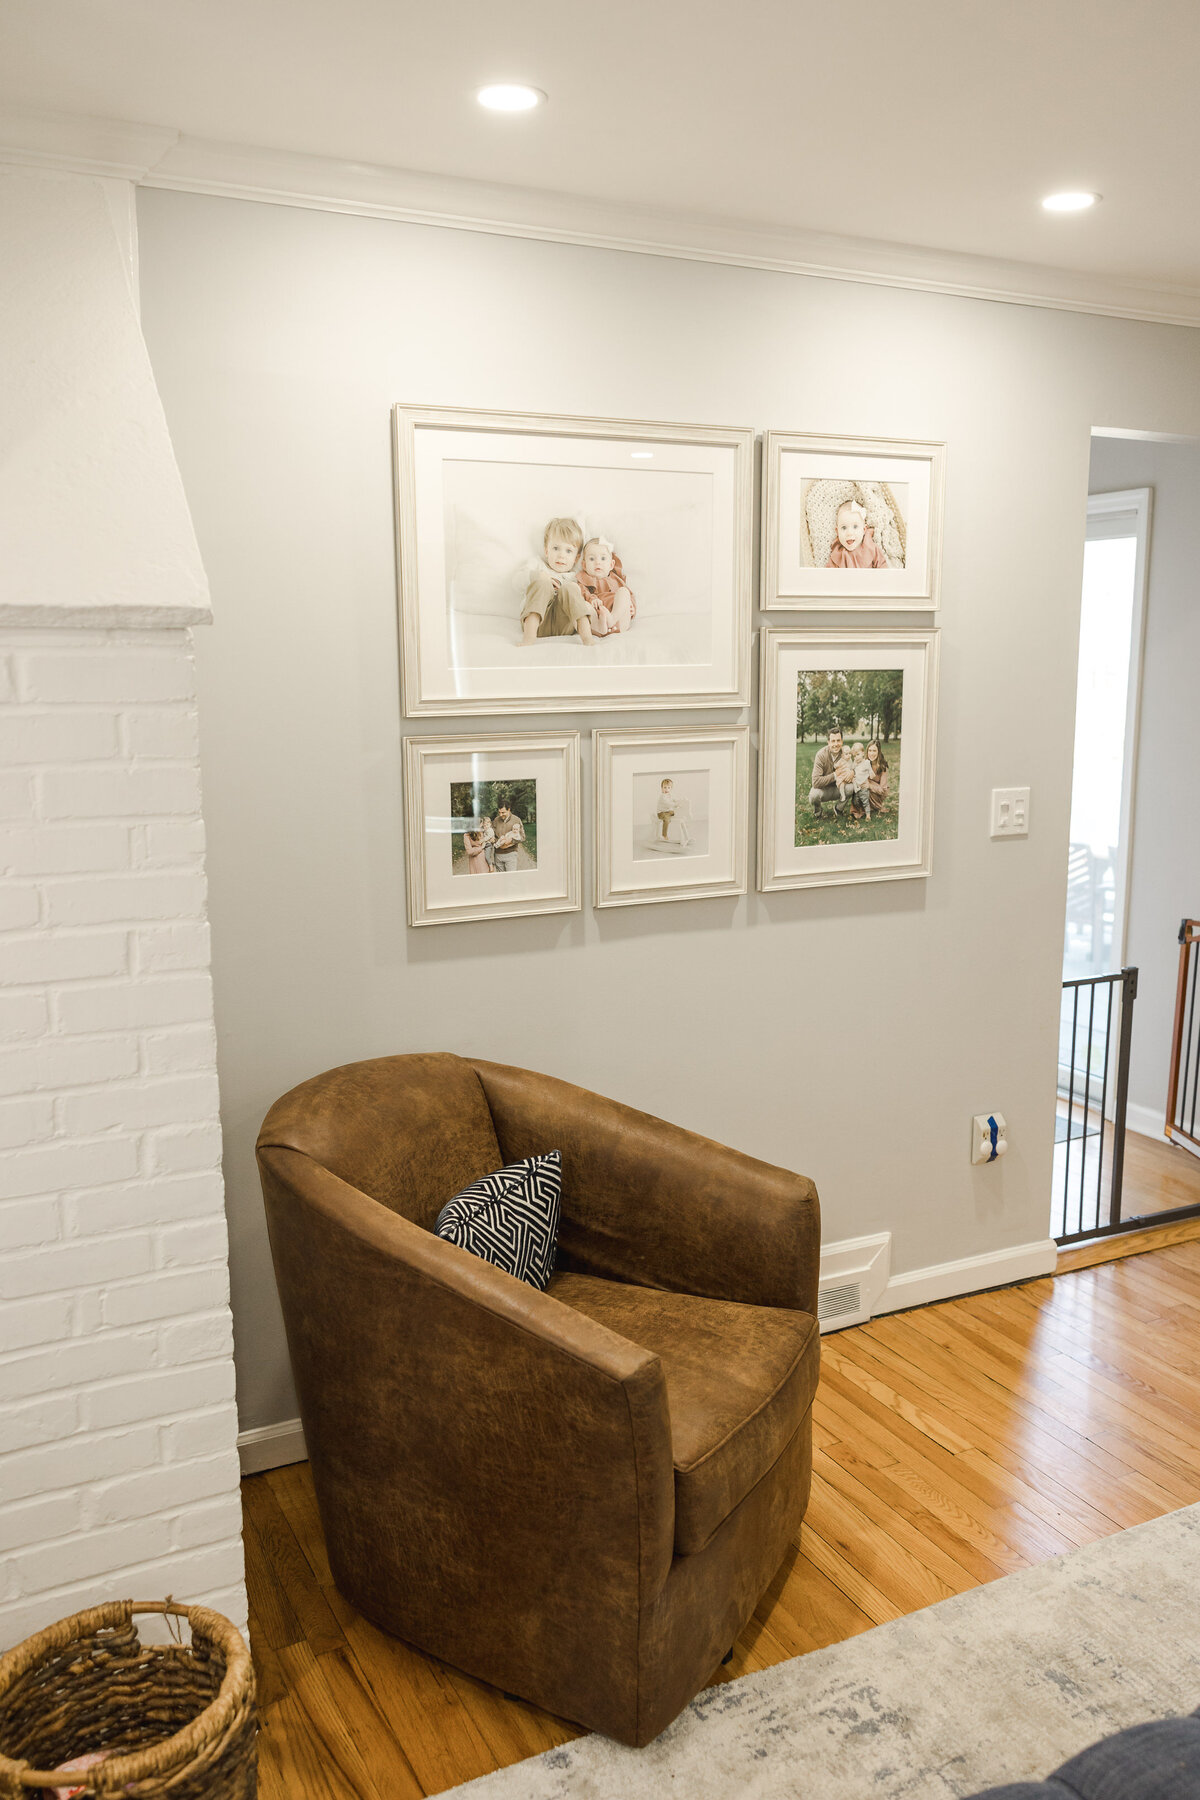 Gallery wall of framed family portraits hanging over a leather chair